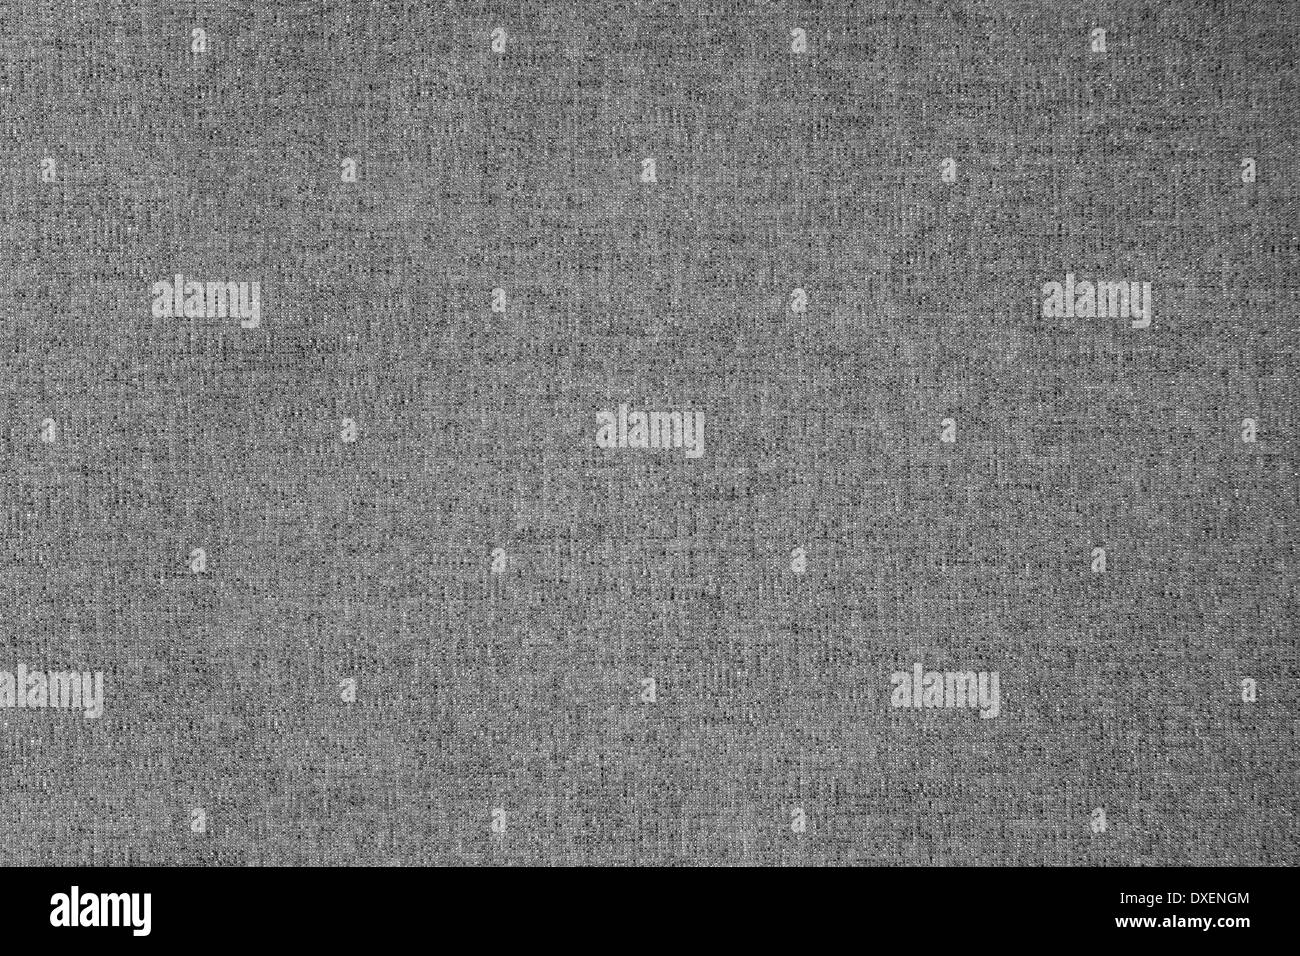 Black and white striped fabric as background Stock Photo - Alamy